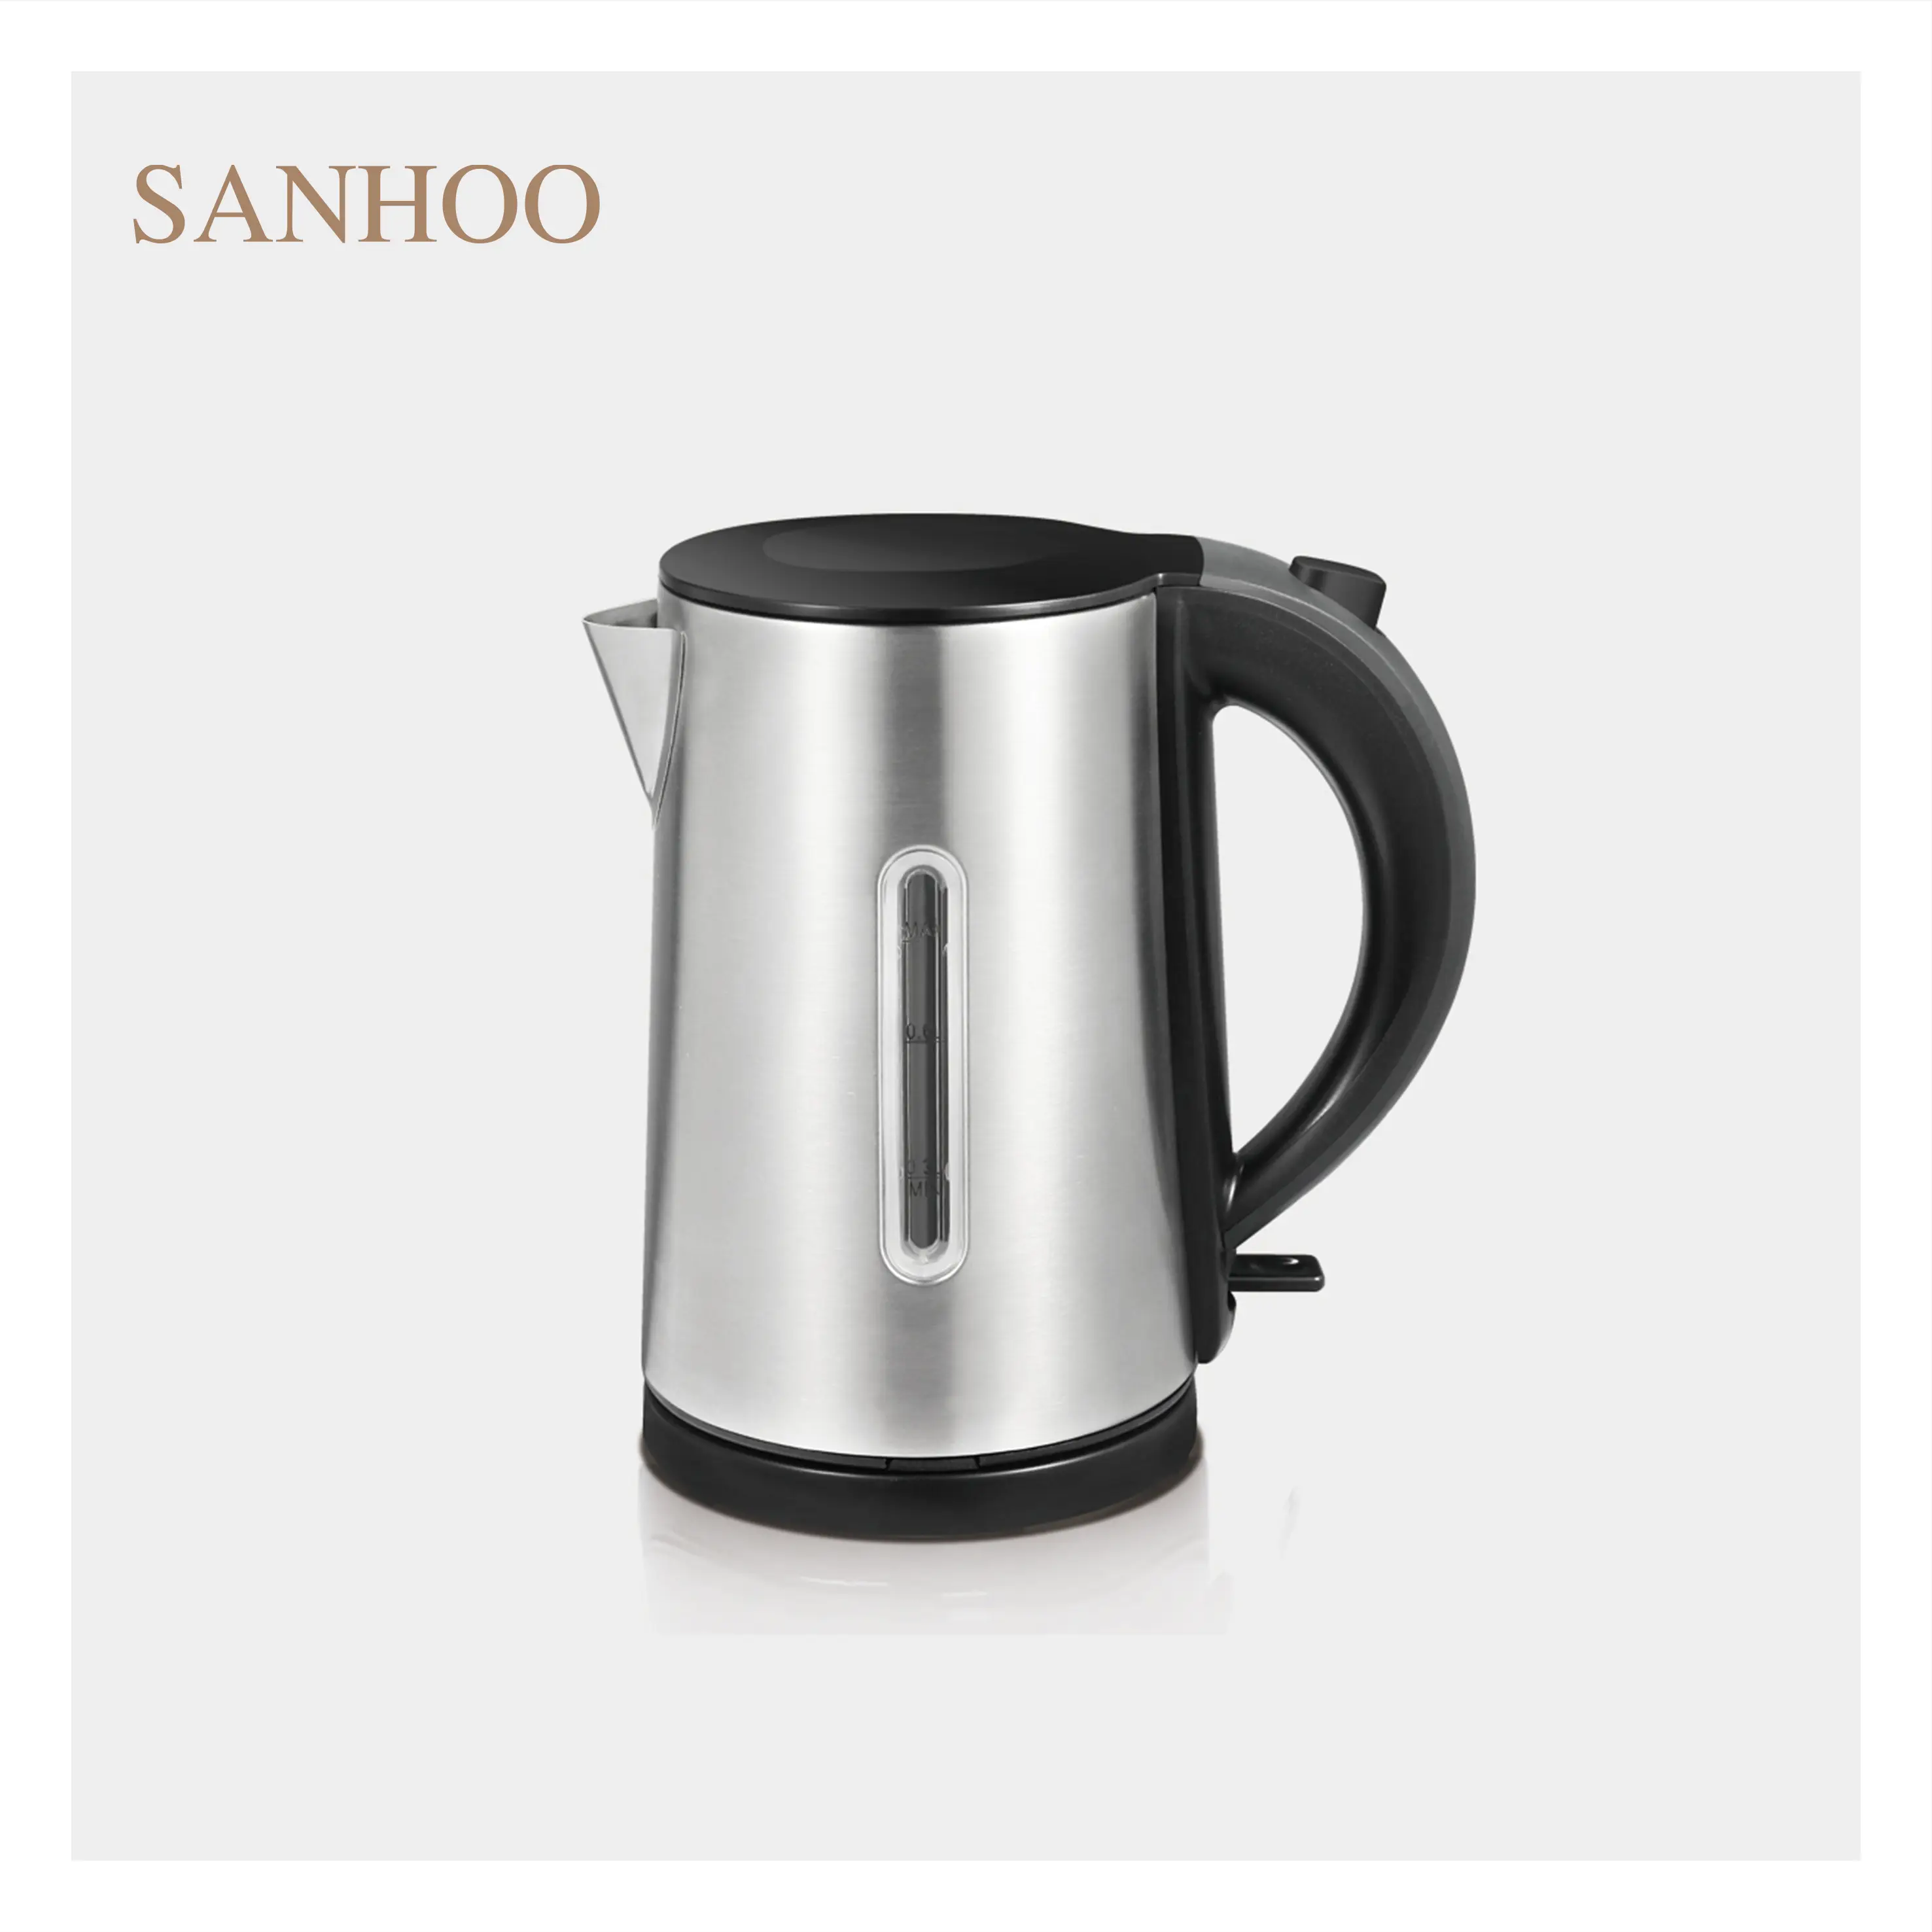 SANHOO Hotel Price Stainless Steel Cordless Kettle Guest Room 1.5L Electric Kettle